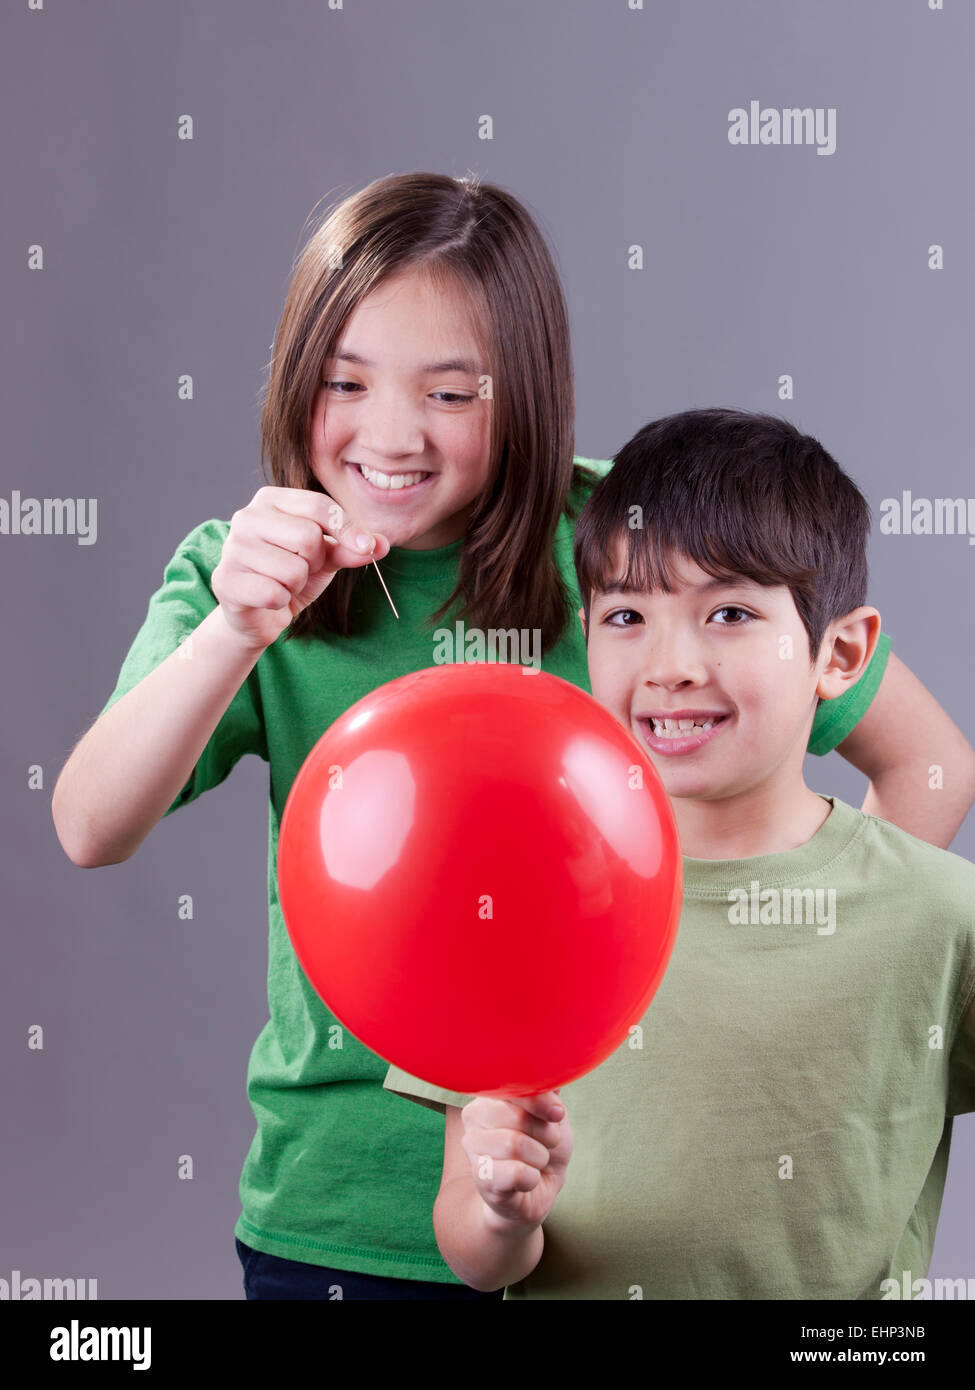 Popping her brother's balloon. Stock Photo